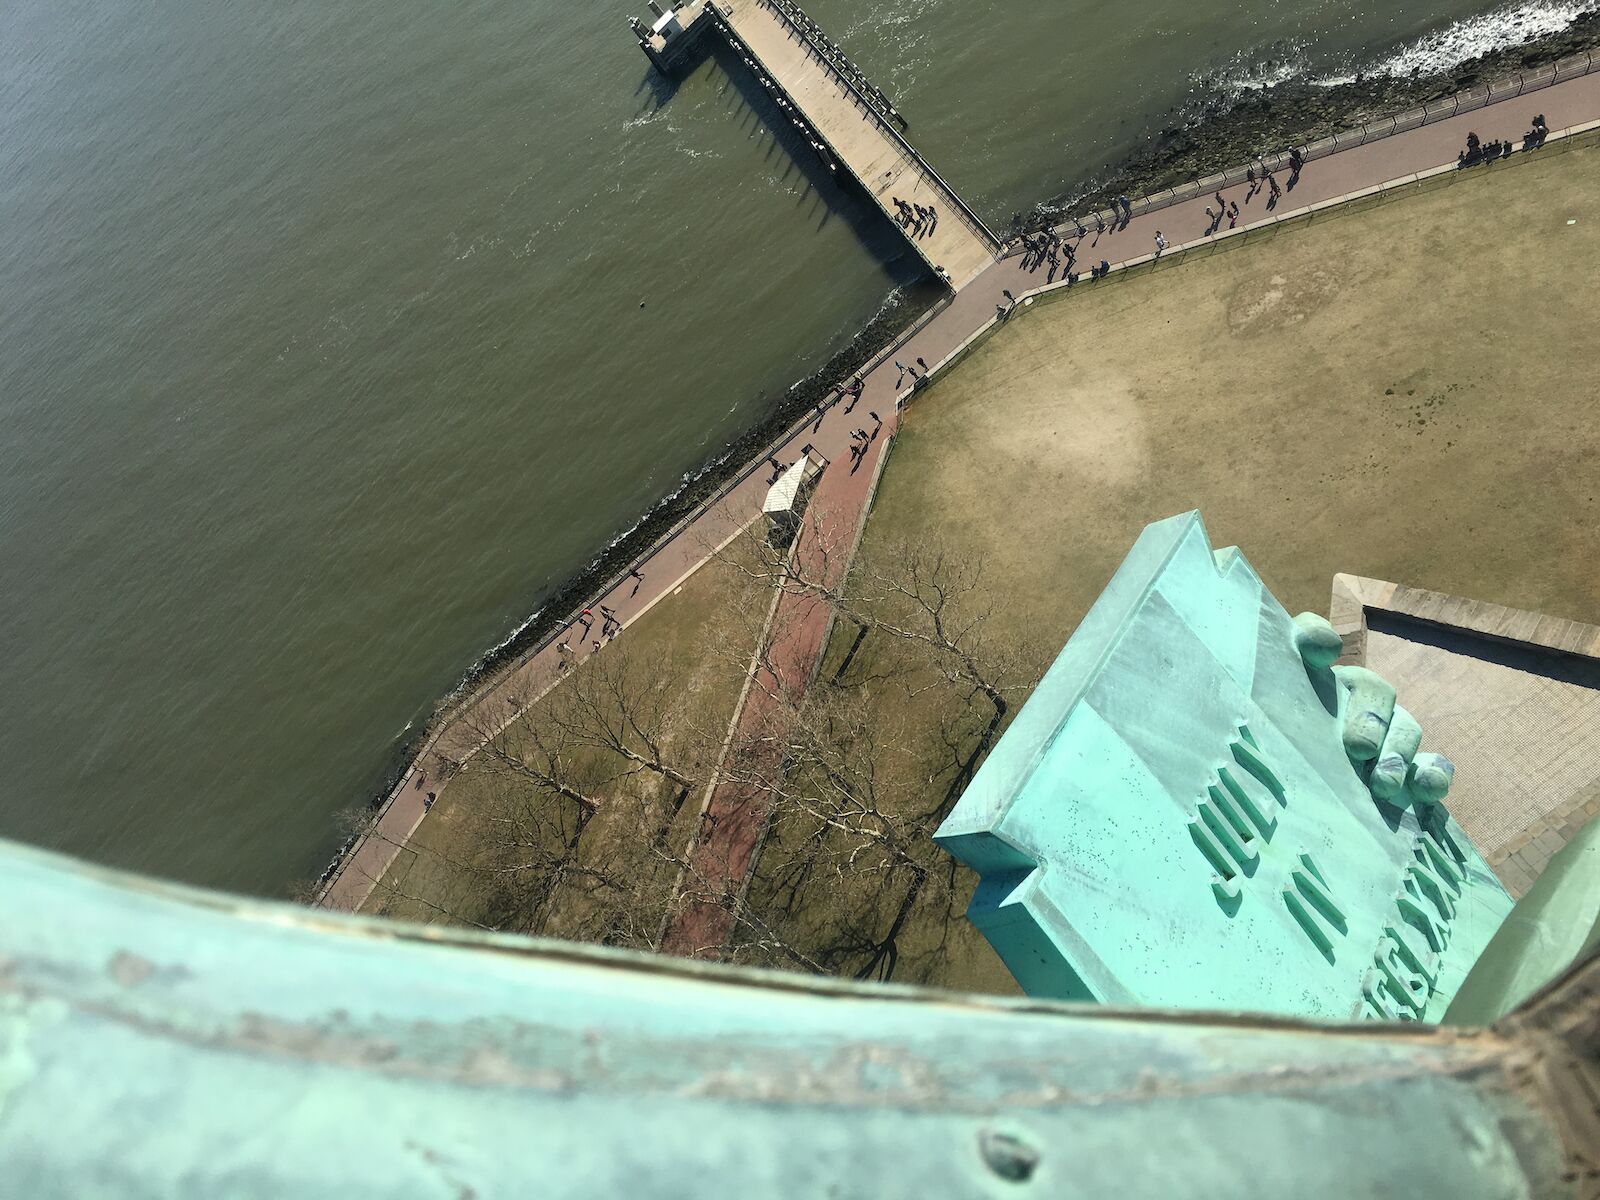 View from inside the Statue of Liberty. View of the tablet.